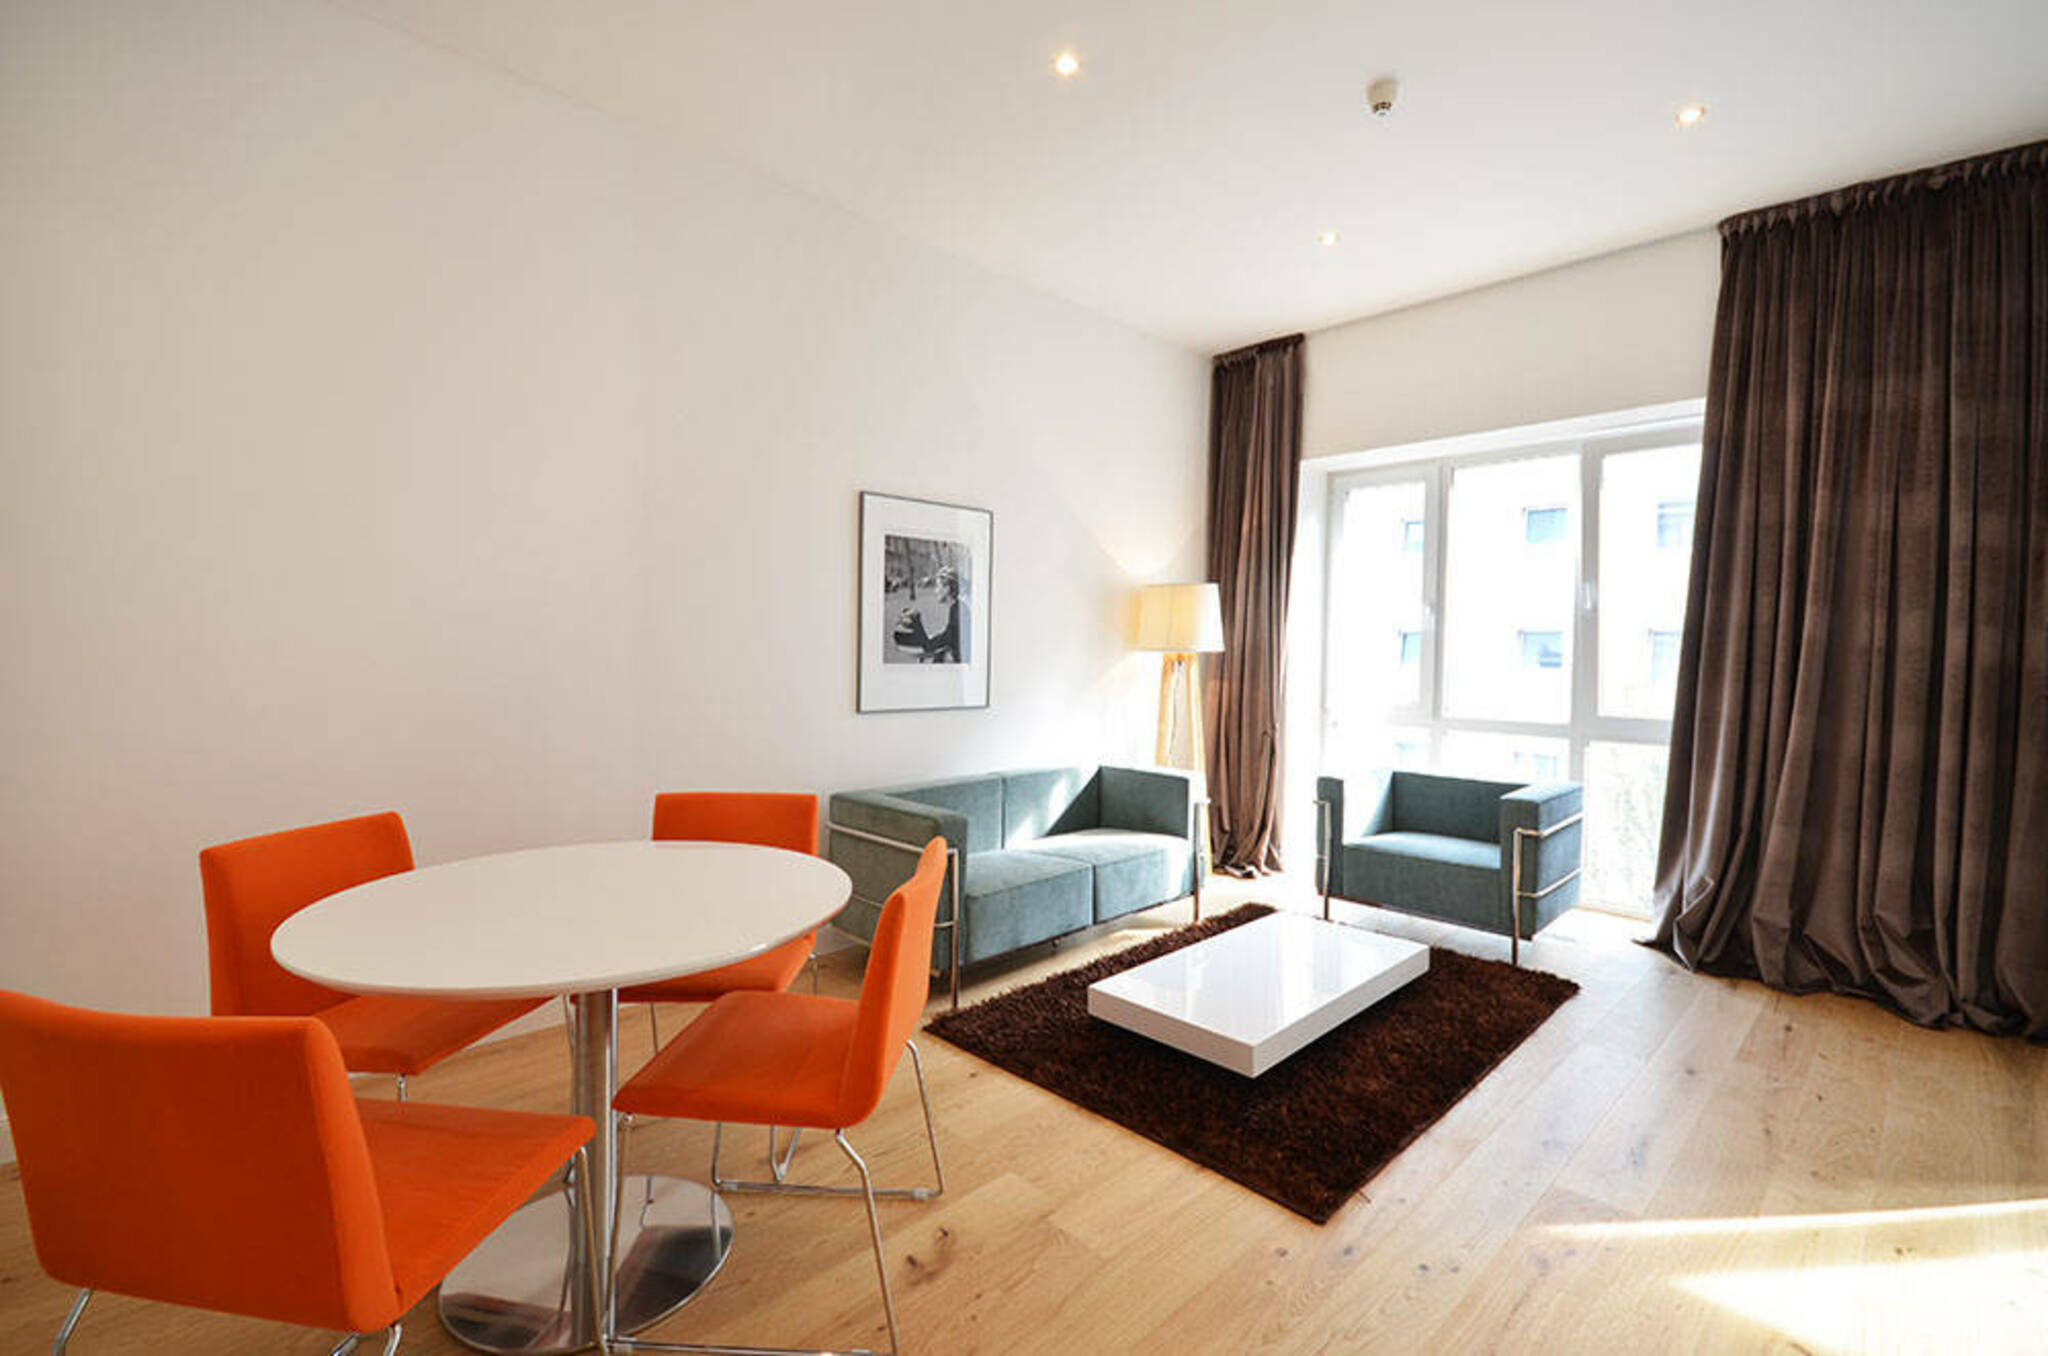 Property Image 1 - Fabulous Apartment close to the Altstadt